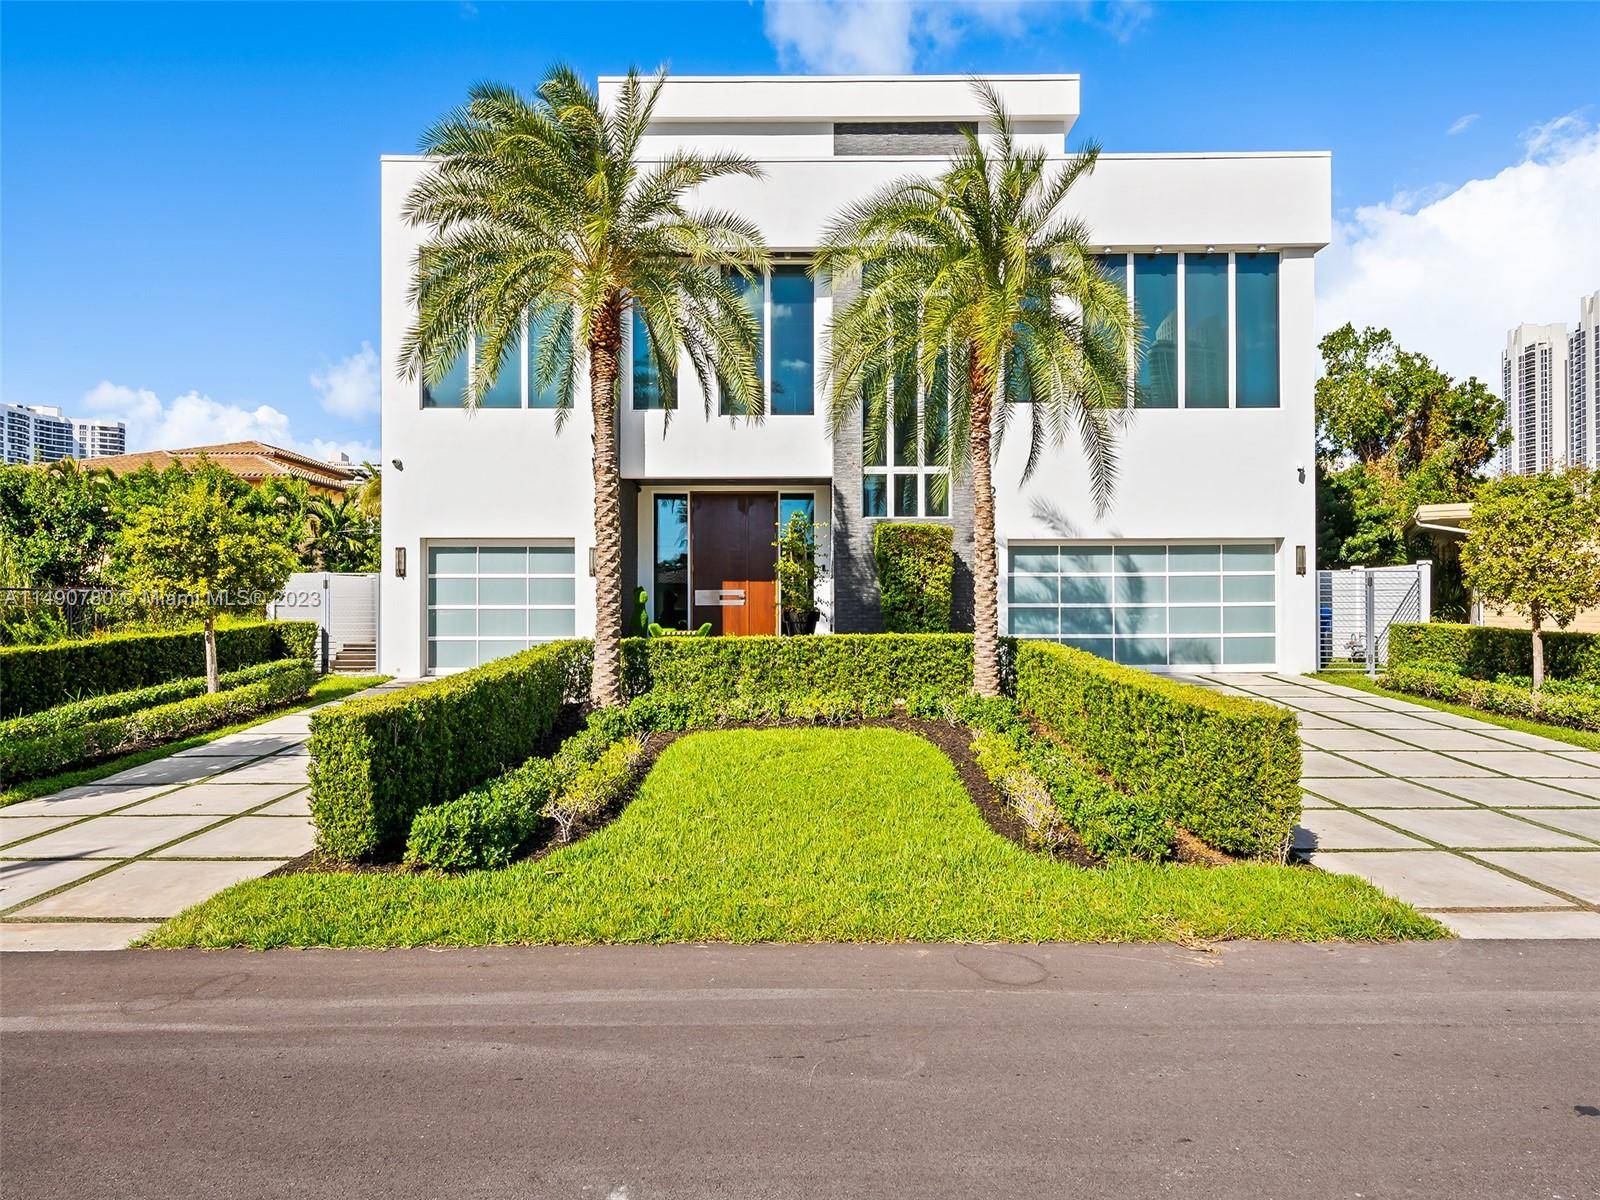 Crafted to perfection in world renowned Sunny Isles Beach, this home stands steps away from Miami s top beaches.